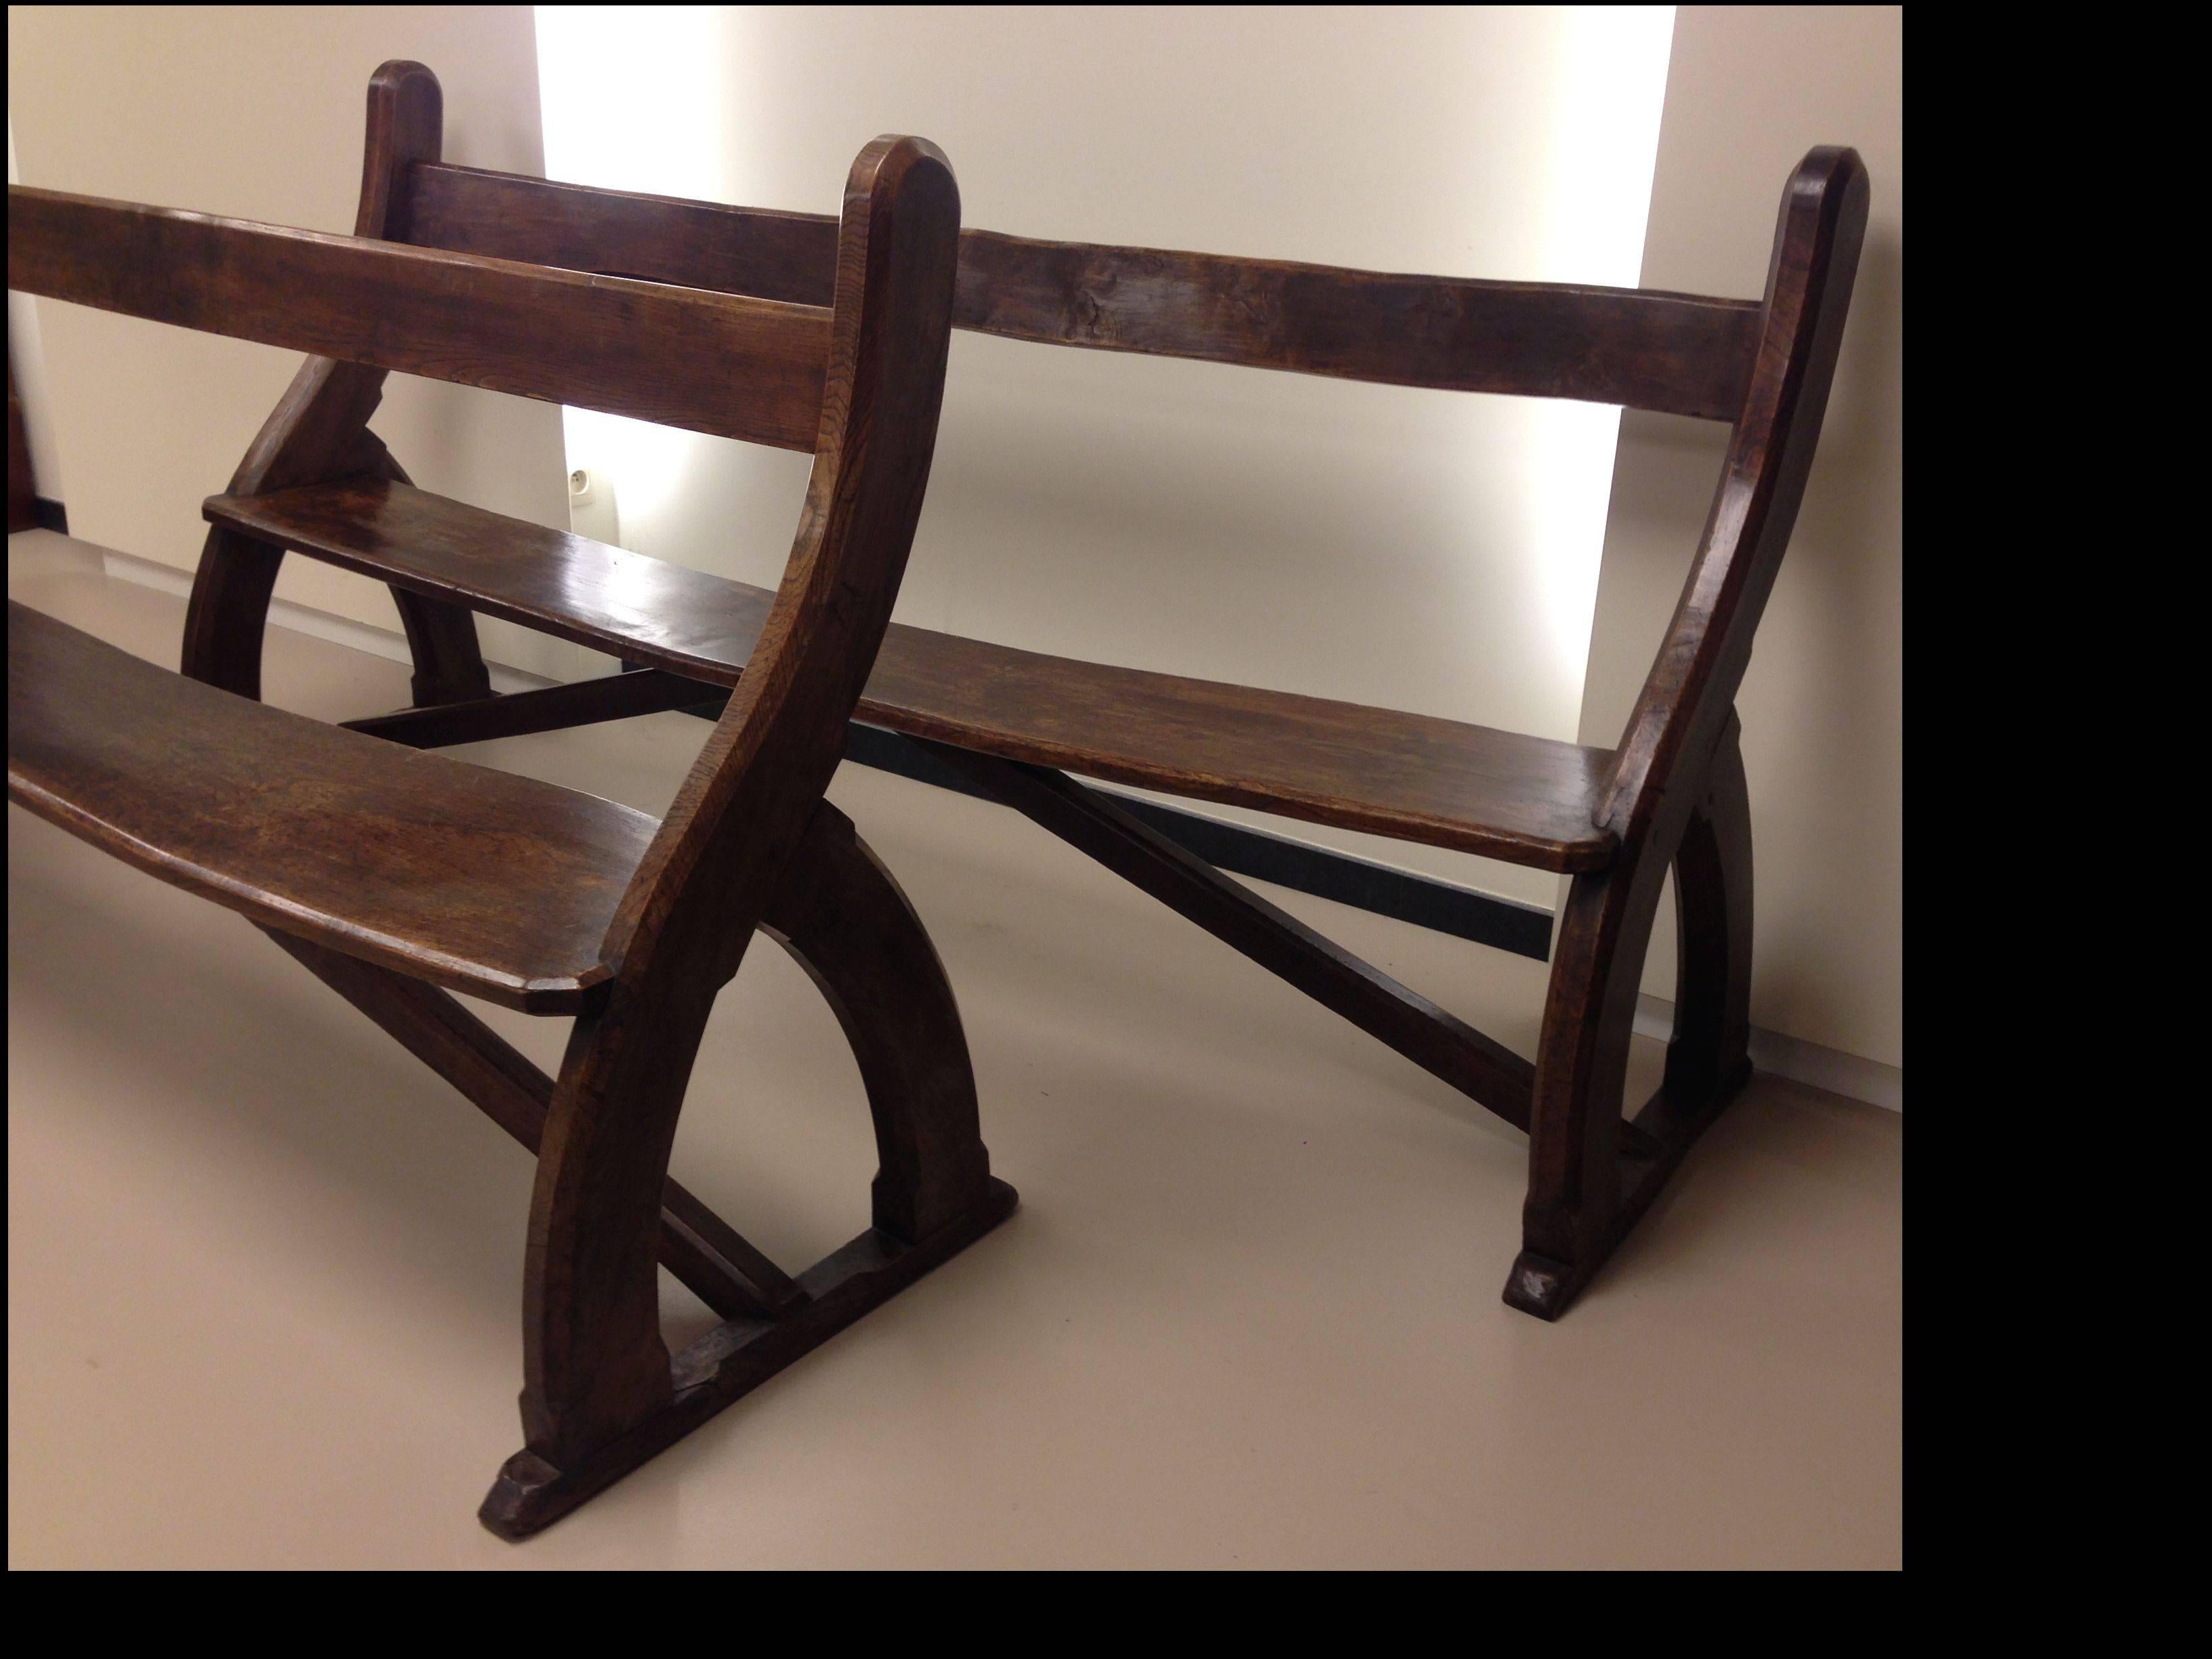 Two Gothic design elm chamfered frame pews or benches, attributed to Hardman & Company, Birmingham and A. W. N. Pugin
Each with a plank horizontal back and seat within scroll outline and pointed arch shaped end supports, on sledge